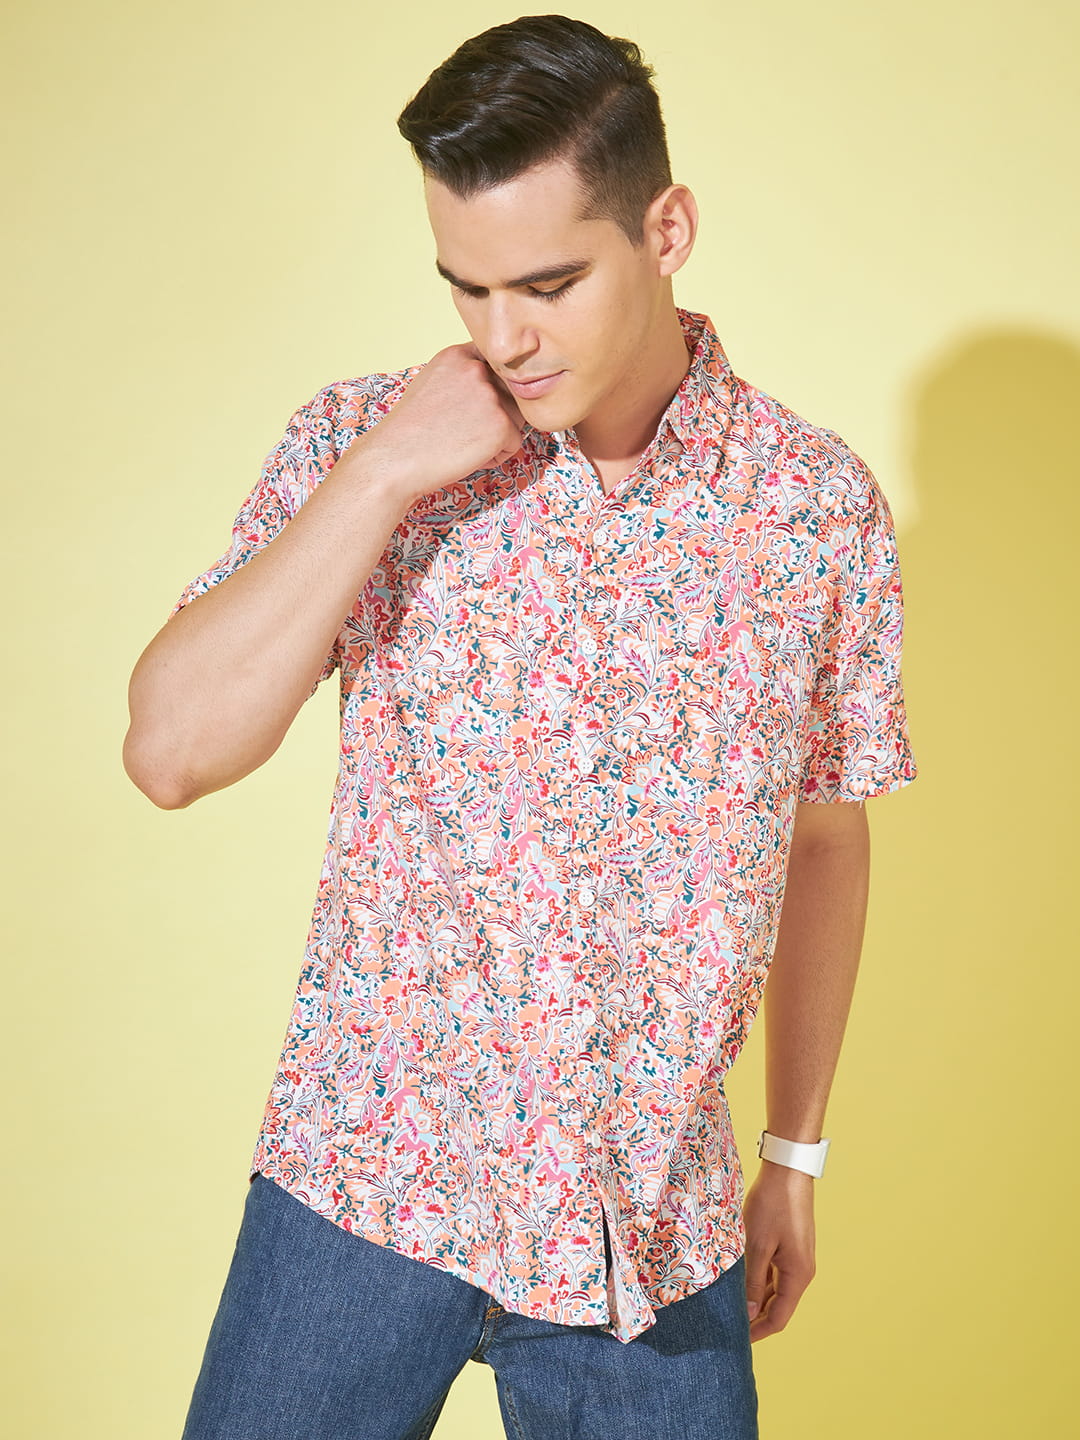 Masculine Finesse: Pink Printed Men's Shirt